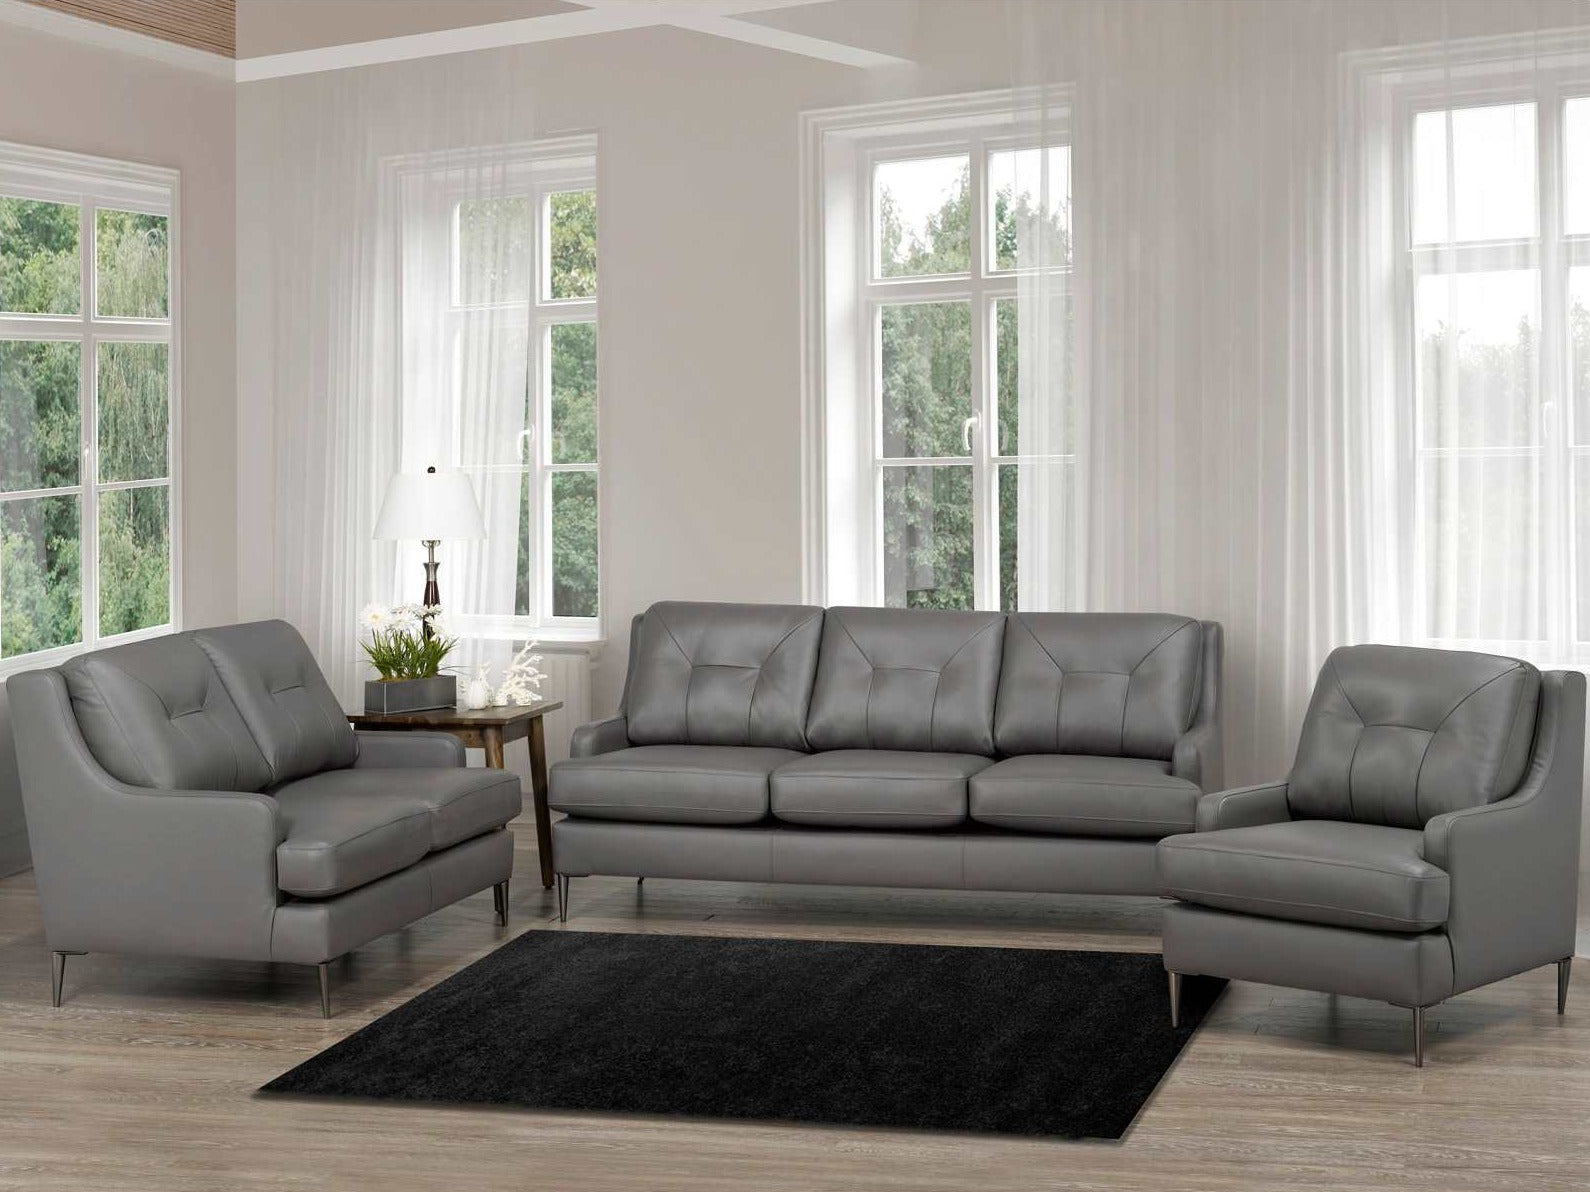 Canadian Made Genuine Leather Florance Fossil Sofa Collection 5557